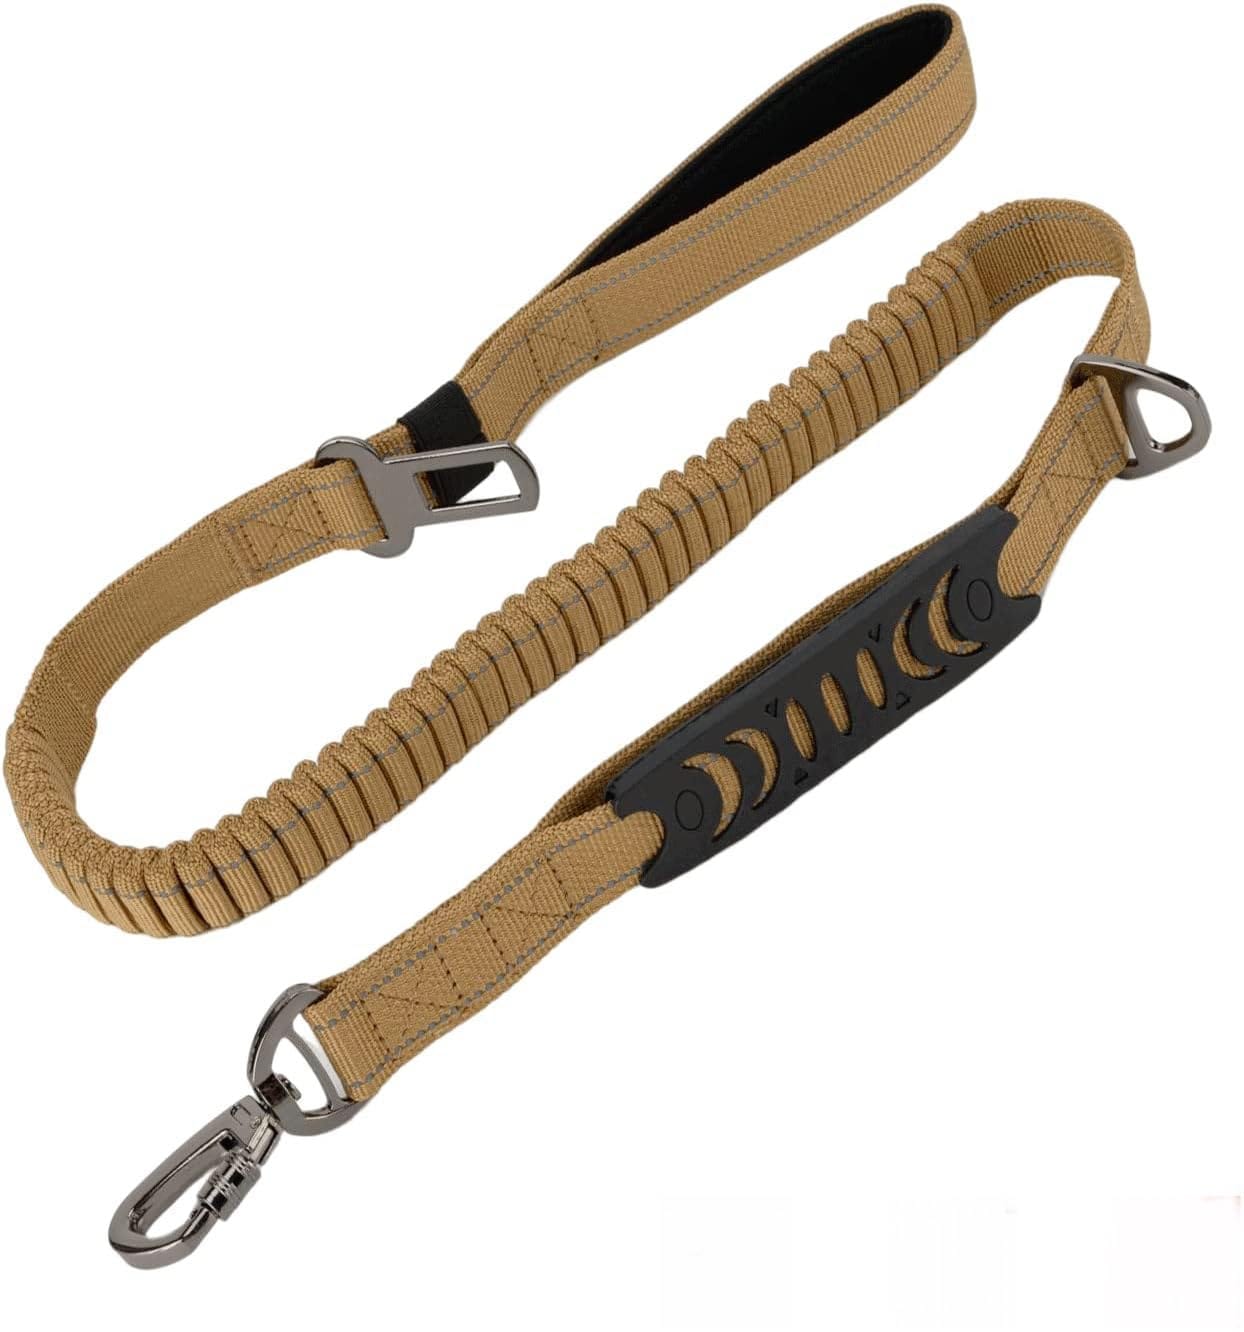 KUTKUT Heavy Duty Dog Leash with Car Seat Belt, 6Ft Shock Absorbing Tactical Bungee Dog Leash, No Pull Dog Training Leash with Double Handle for Small Medium Large Breed (Brown)-Leash-kutkutstyle